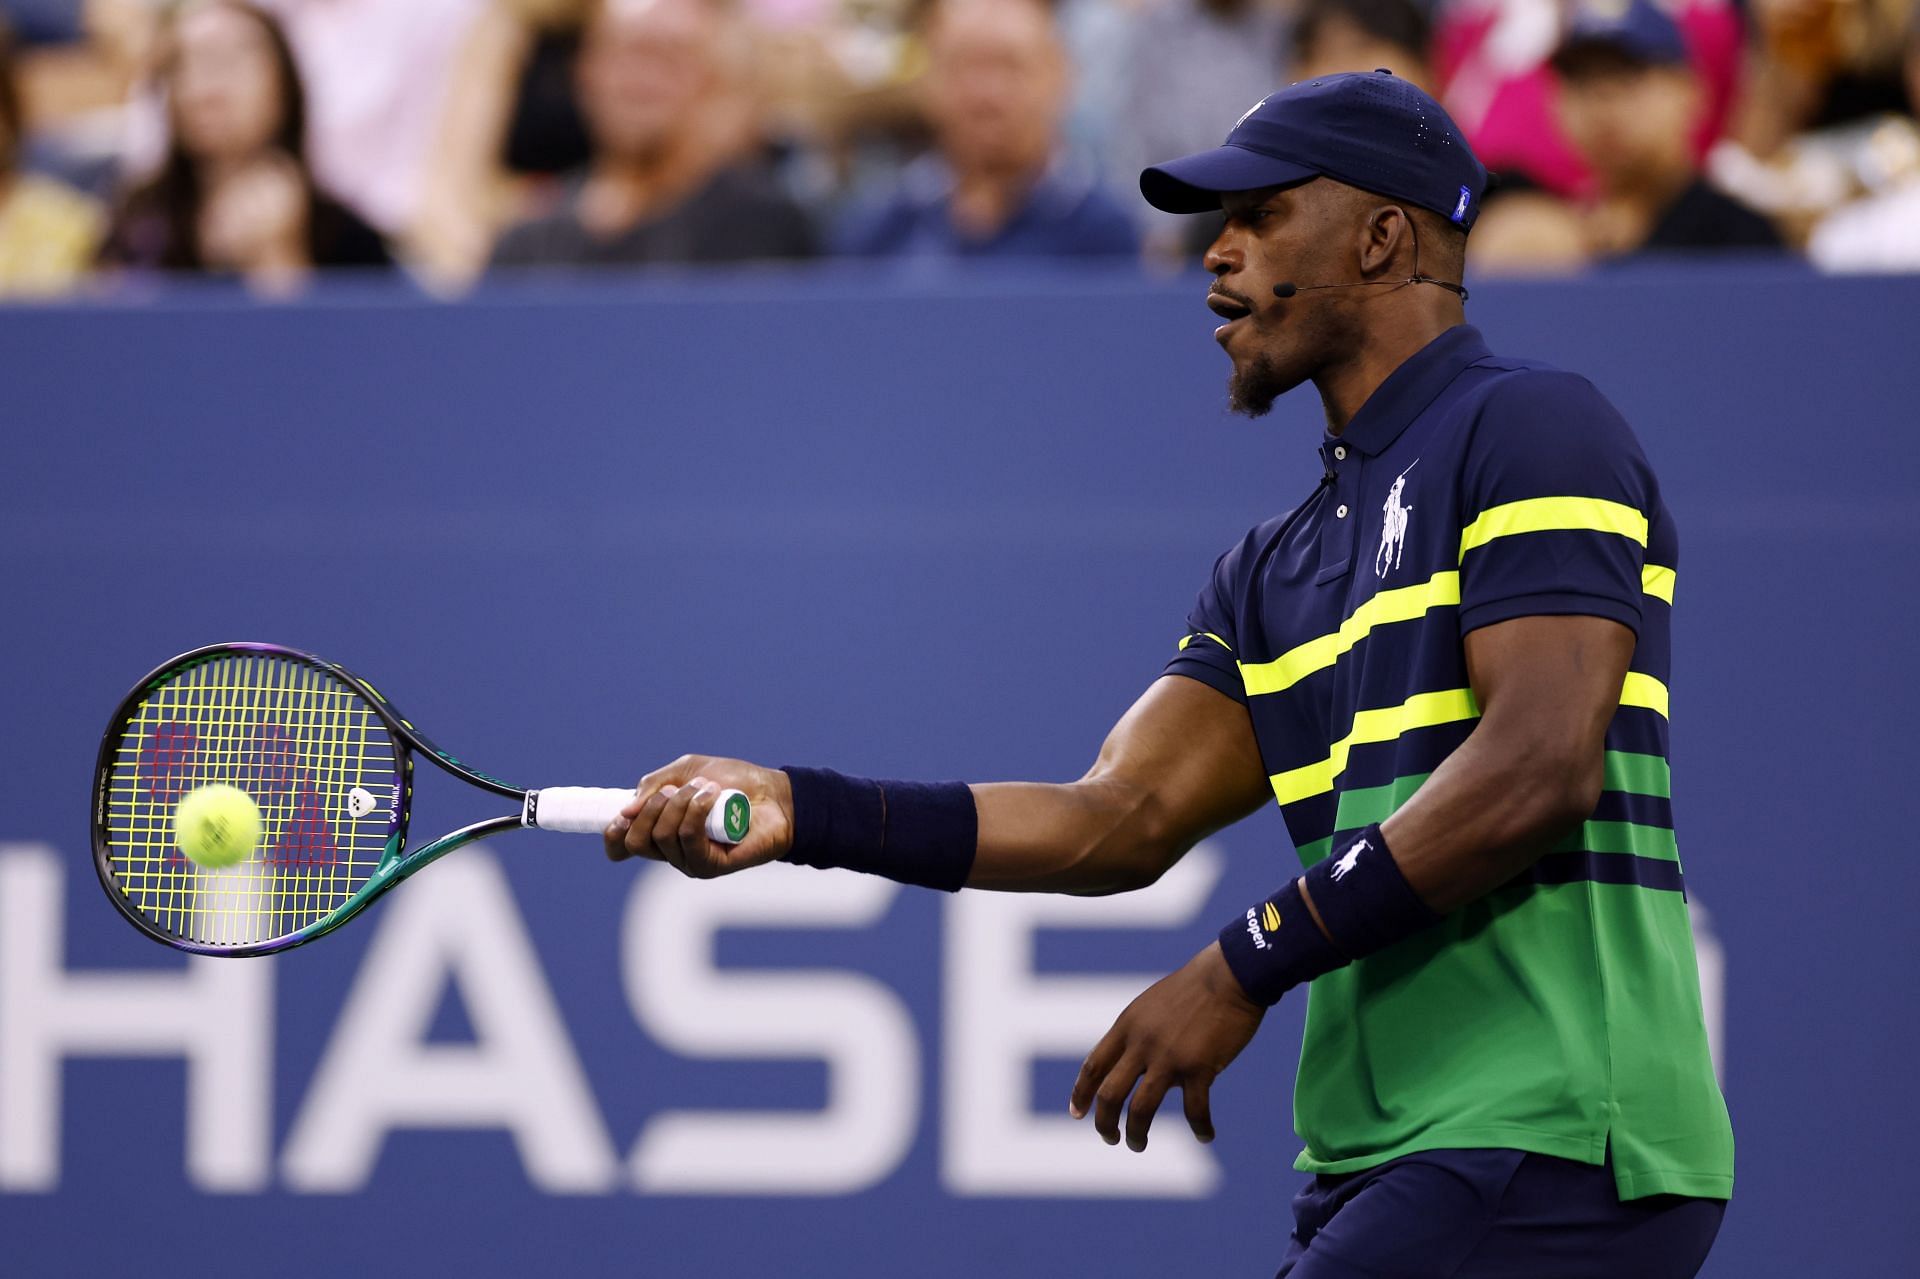 2023 US Open - Stars of the Open Exhibition Match to Benefit Ukraine Relief